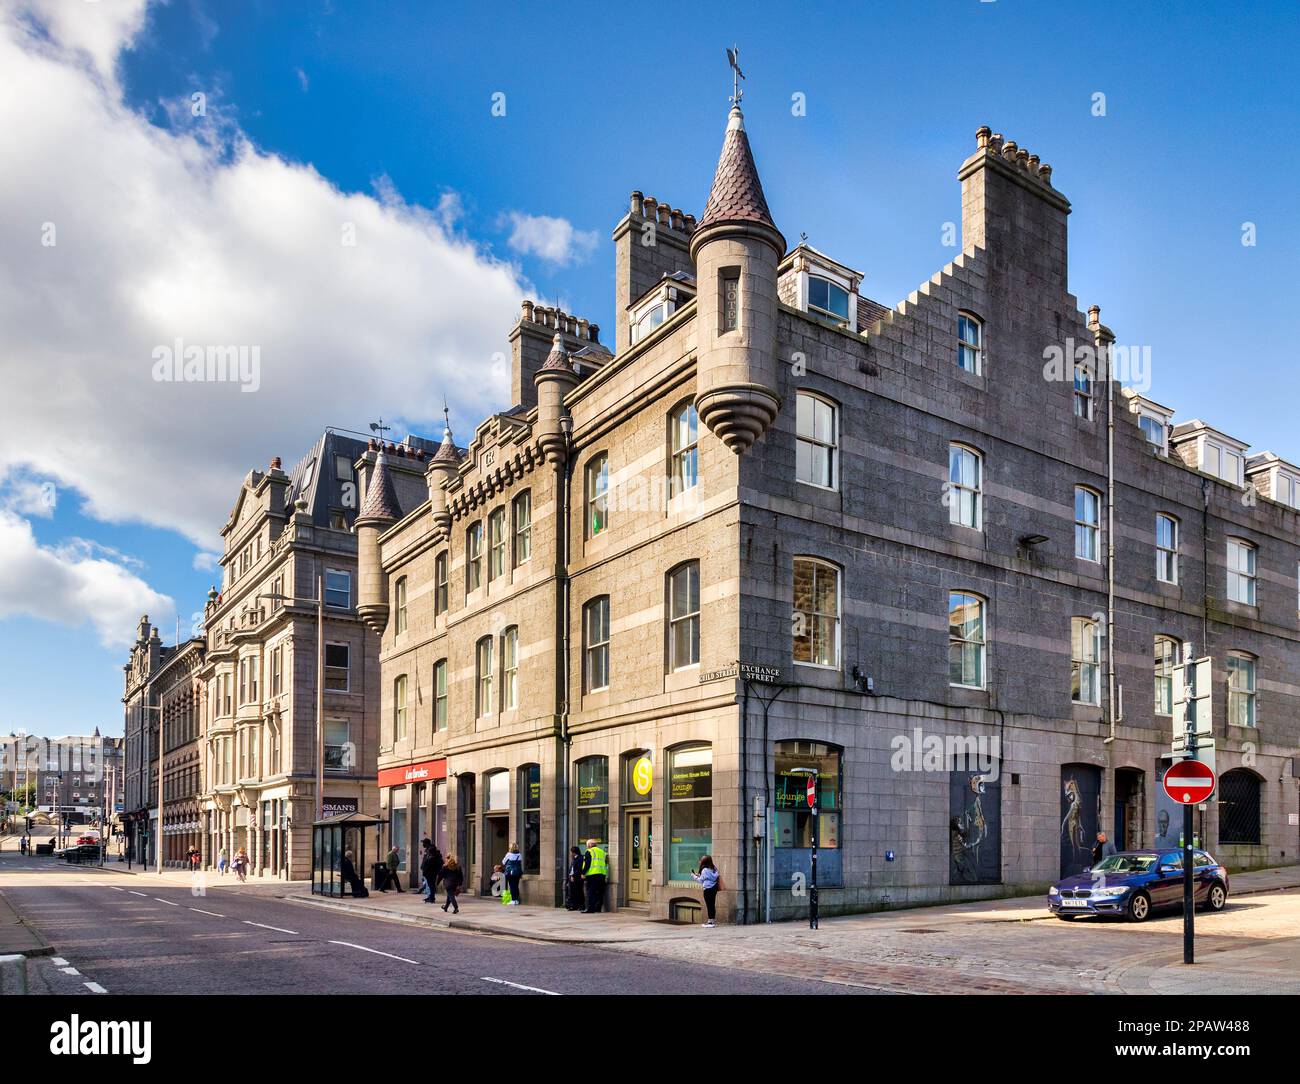 13 September 2022: Aberdeen, Scotland - Corner of Guild Street and Exchange Street in the CBD, showing the famous Victorian granite architecture which... Stock Photo